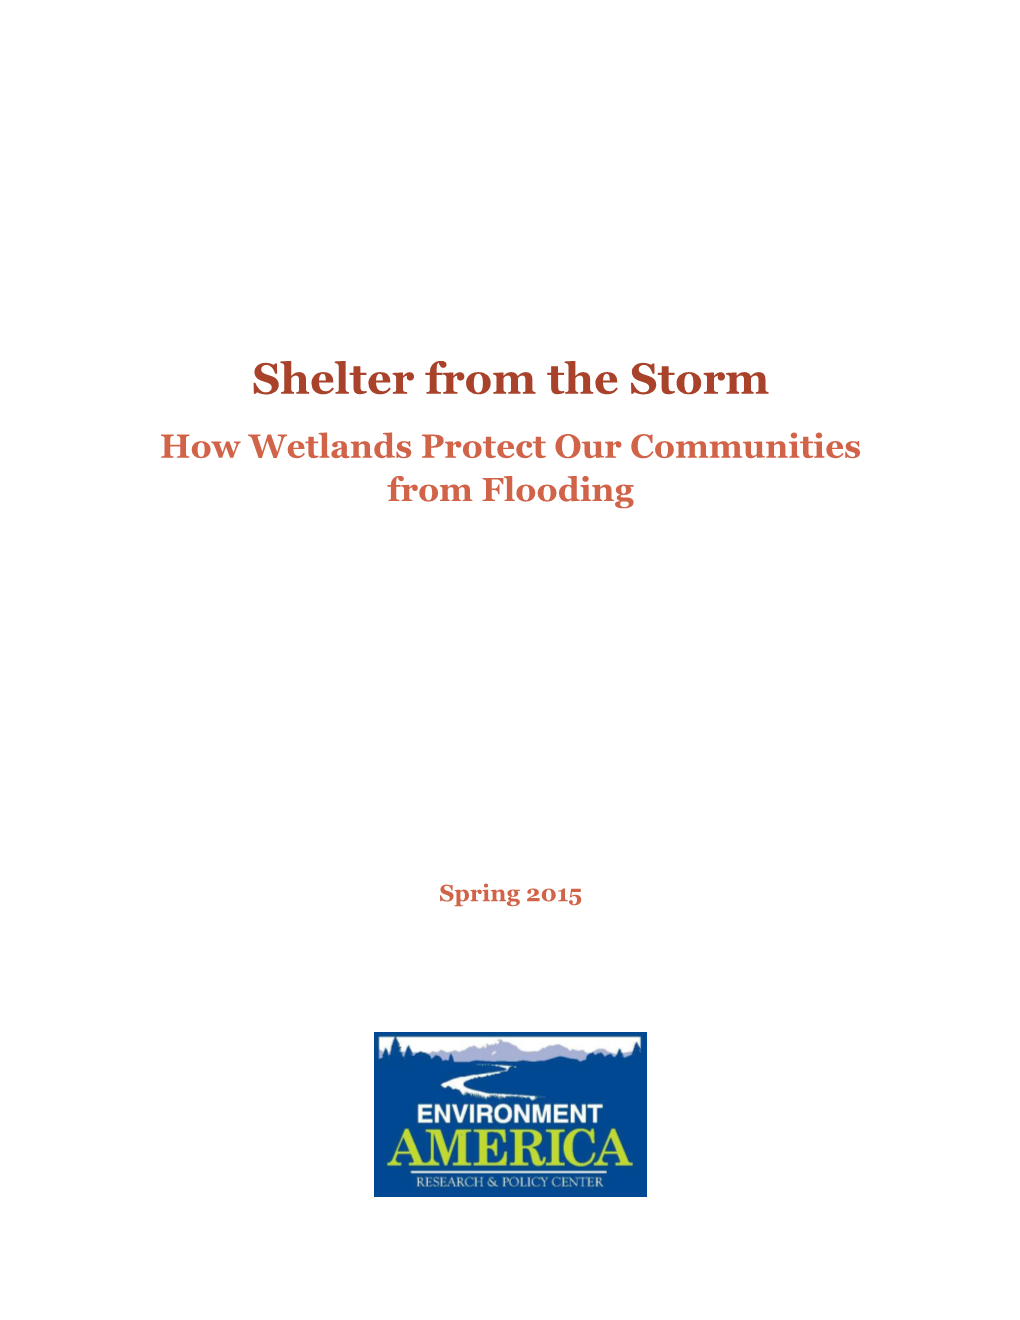 Shelter from the Storm How Wetlands Protect Our Communities from Flooding